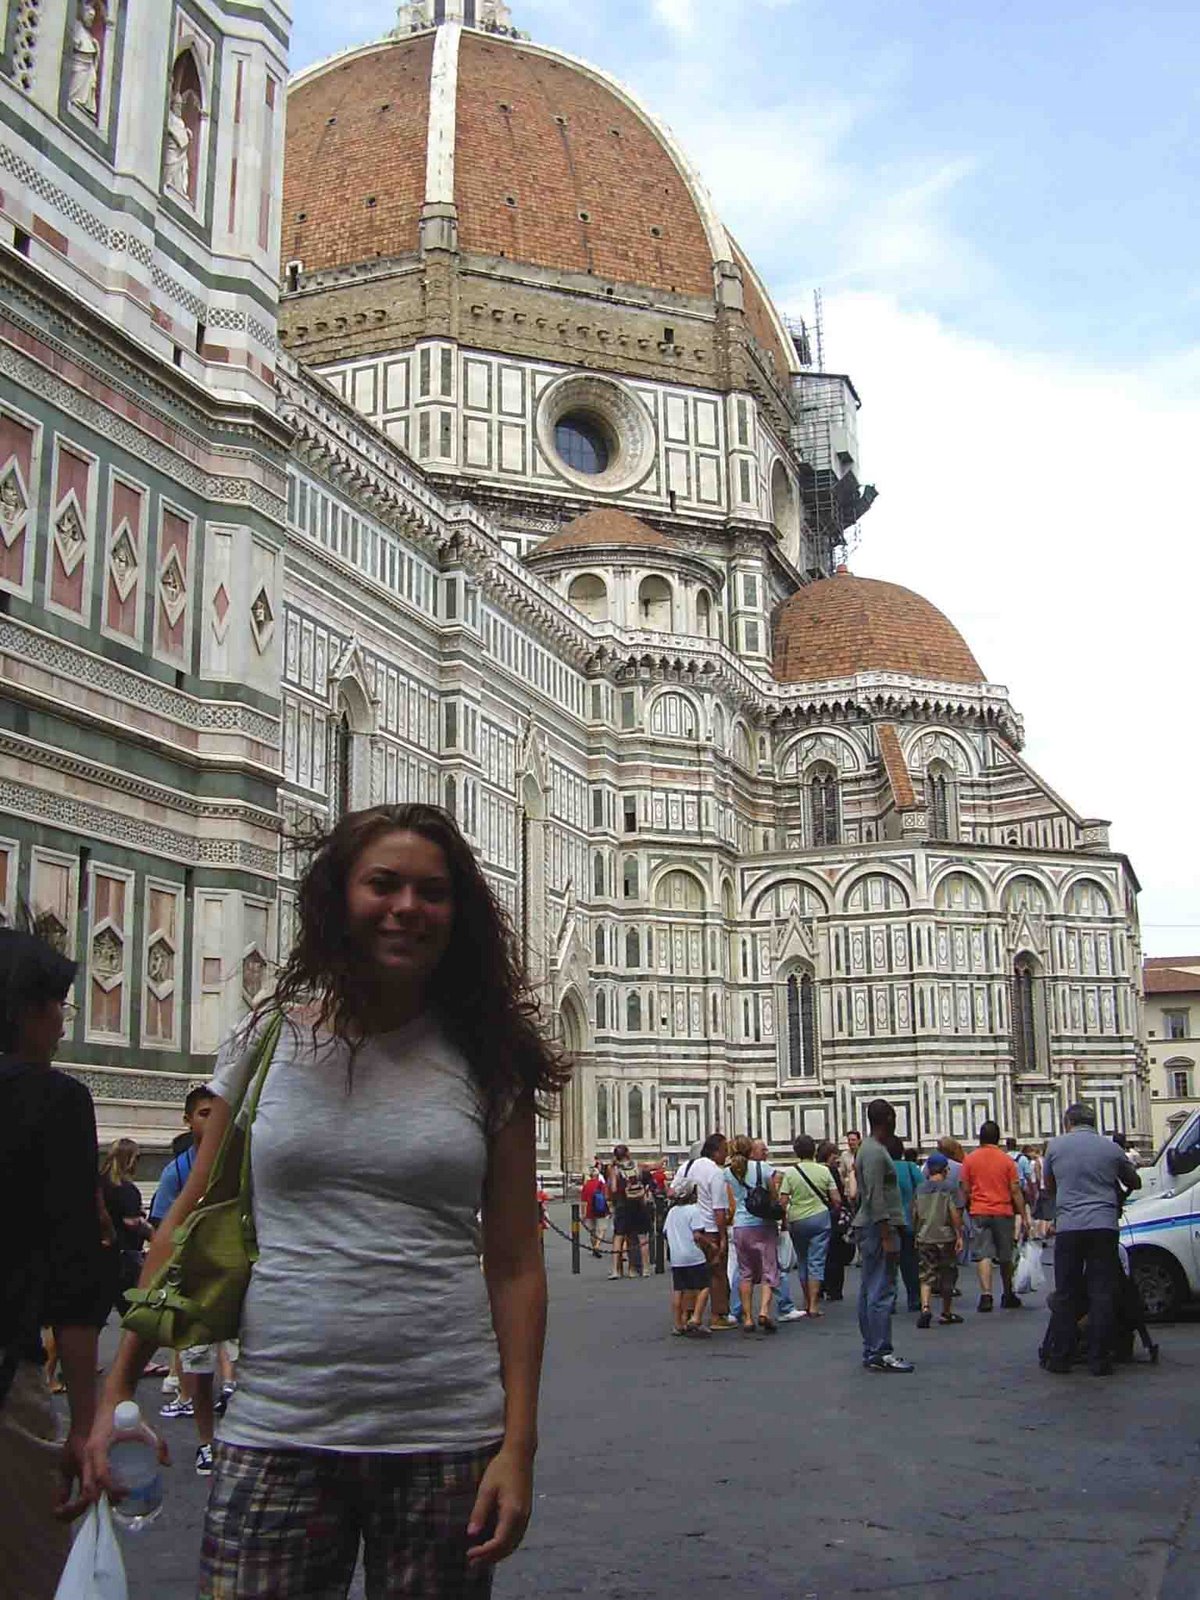 [me+in+front+of+Duomo.jpg]